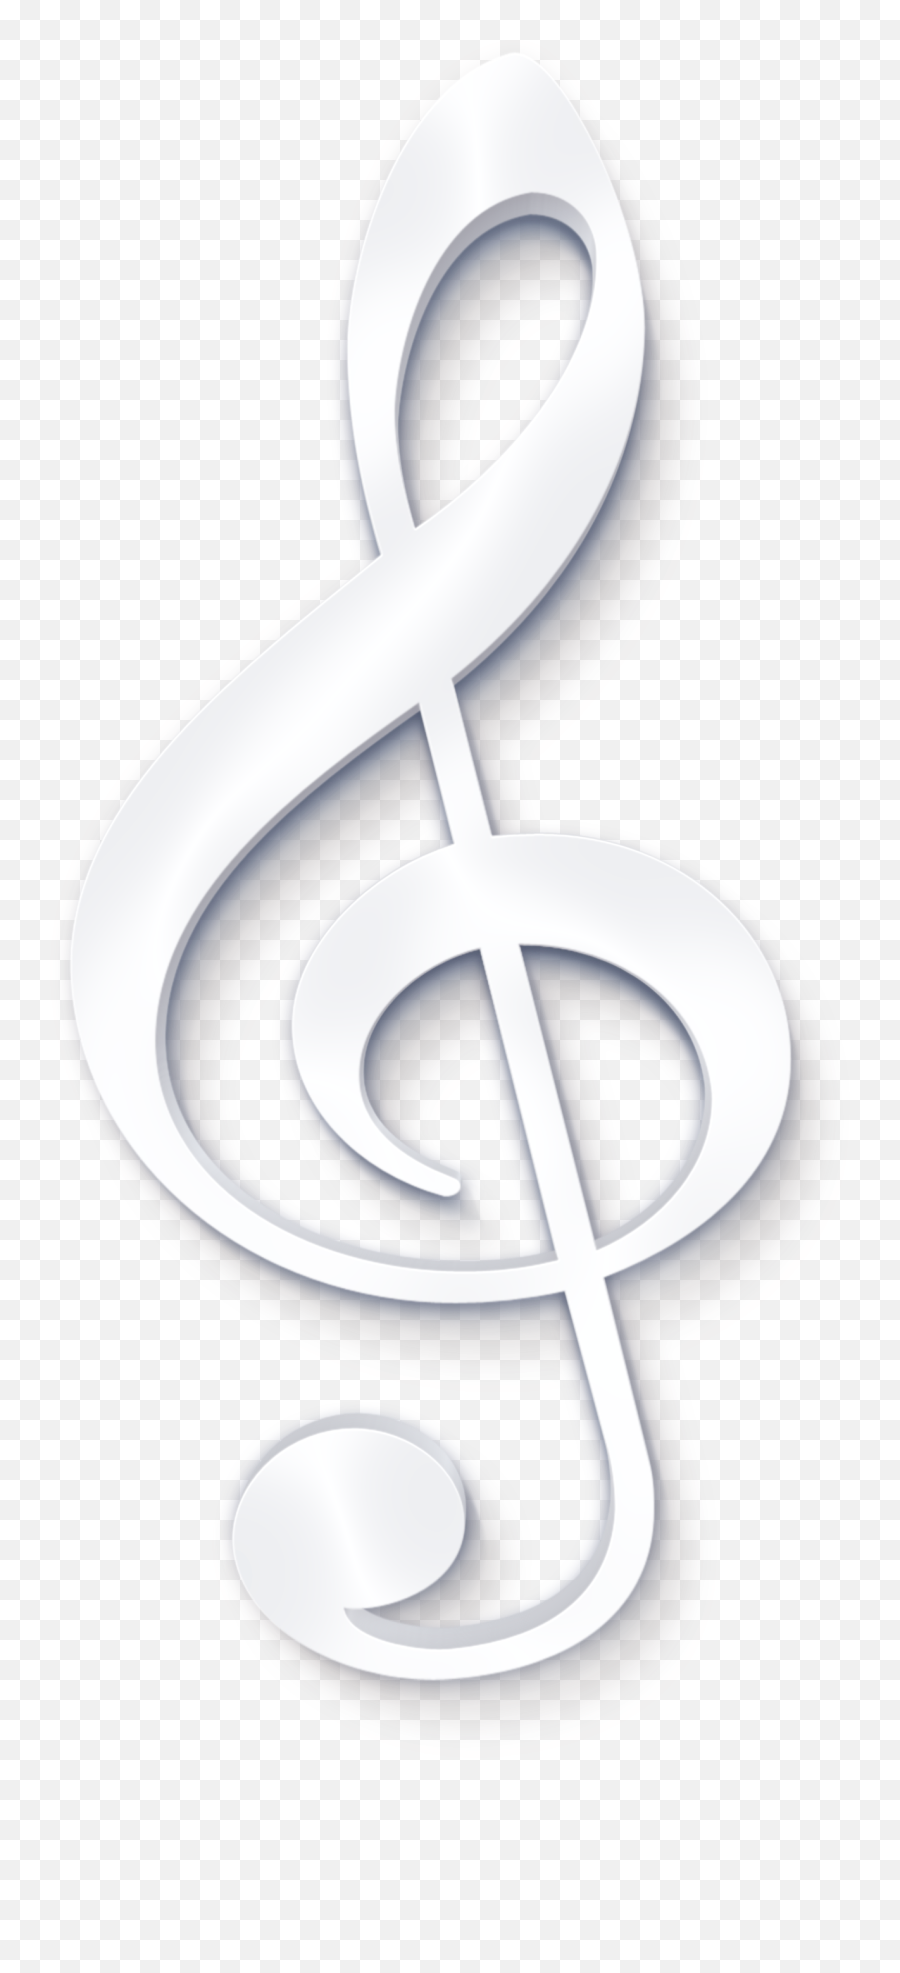 Treble Clef Music - Free Image On Pixabay Music Symbol In White Png,Treble  Clef Transparent Background - free transparent png images 